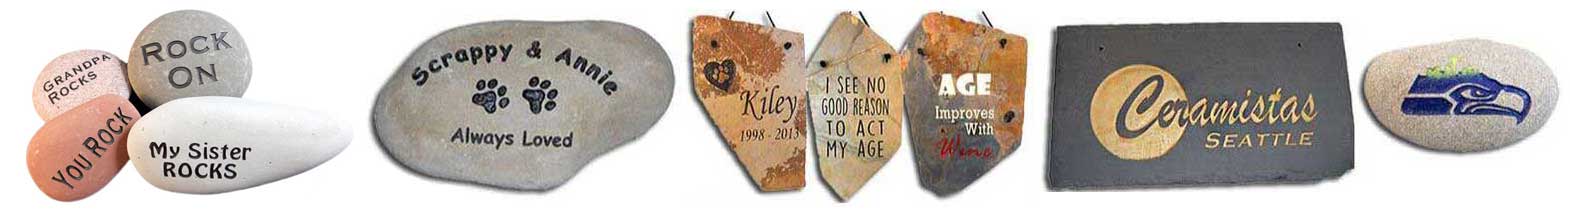 Personalized engraved rock and slate rock gifts for weddings, memorials and celebrations